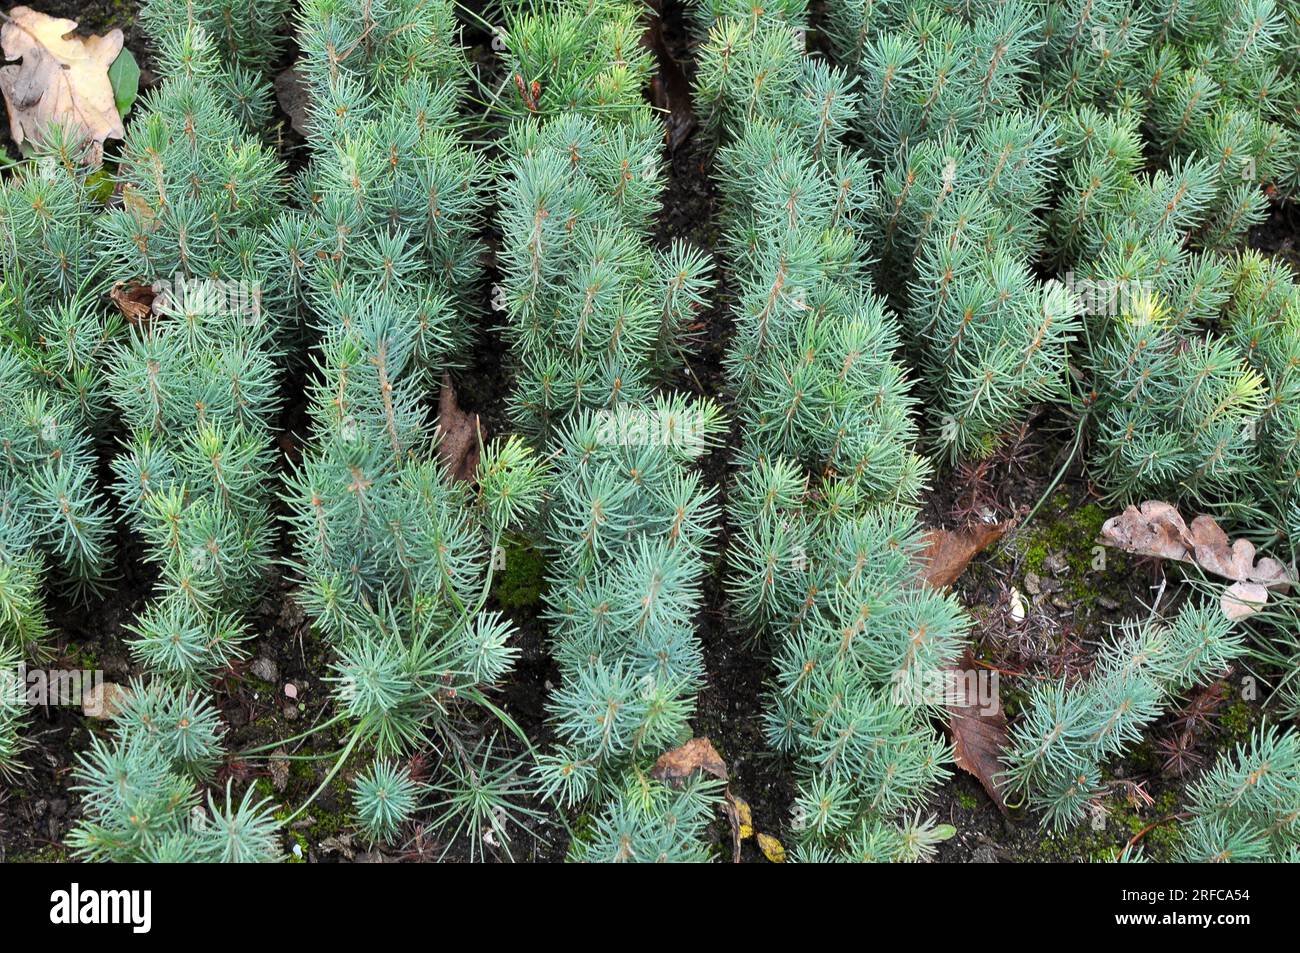 Seedlings of young coniferous trees grown in a nursery in forestry Stock Photo